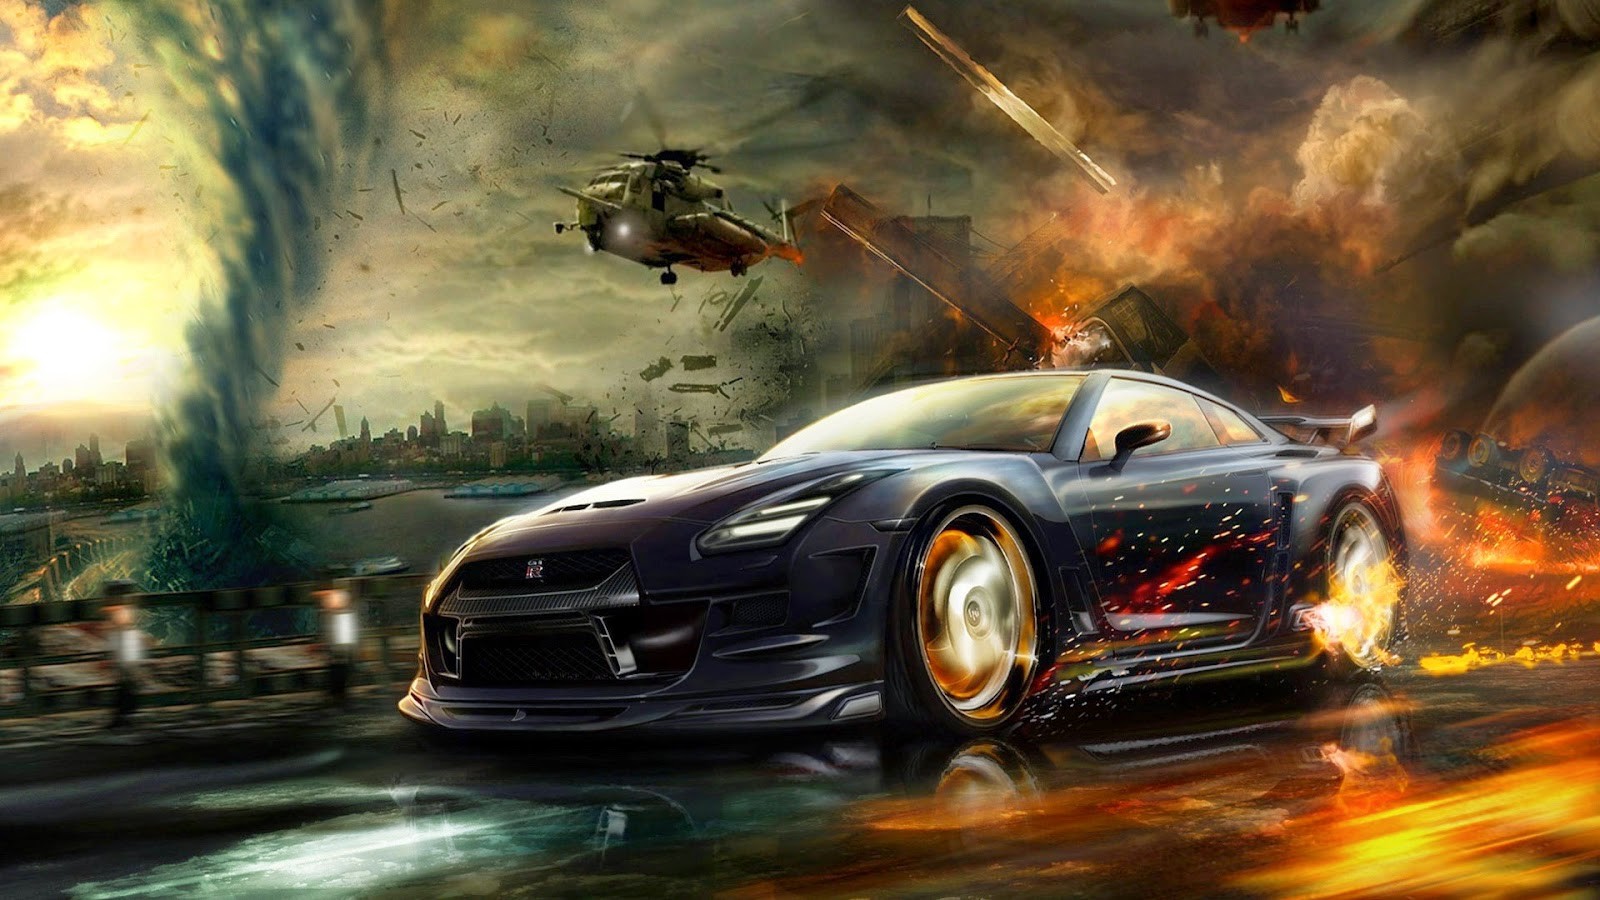 video Games, Rally Cars, Racer, Need For Speed: No Limits, Fantasy Art, Artwork Wallpaper